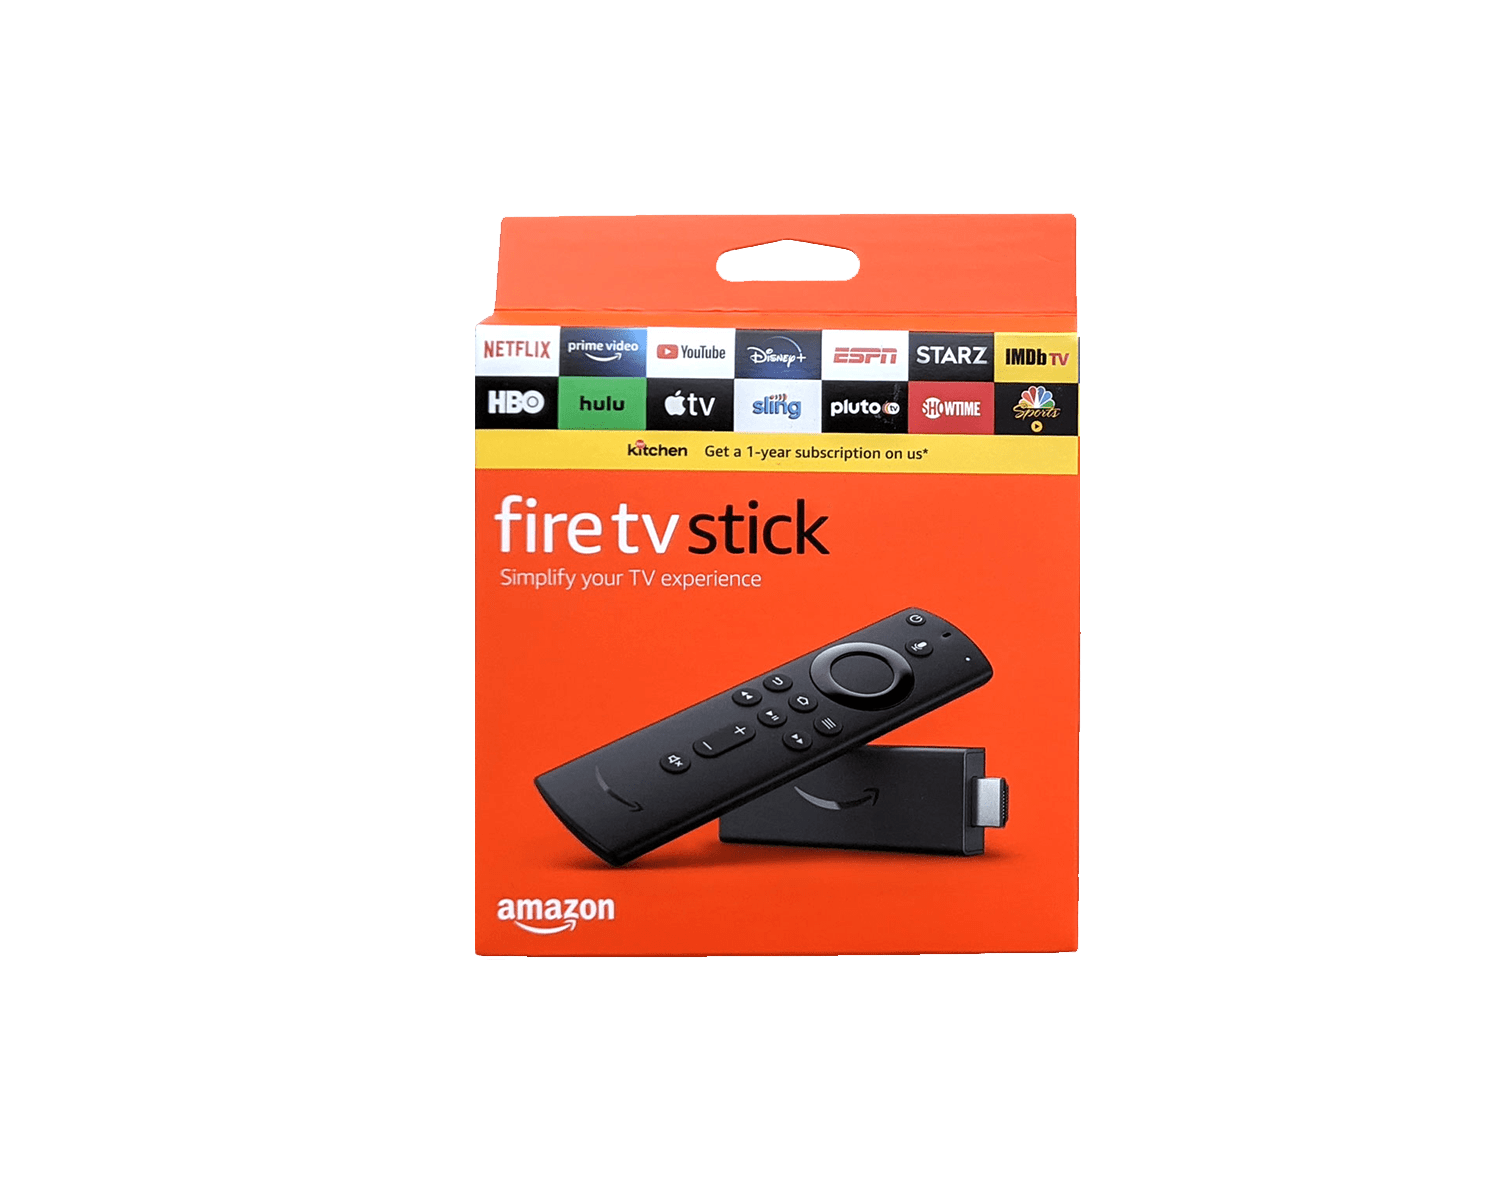 Fire TV Stick 4K with Alexa Voice Remote (includes TV controls)  Dolby Vision Fire Stick, smart TV, smart device, 4K resolution